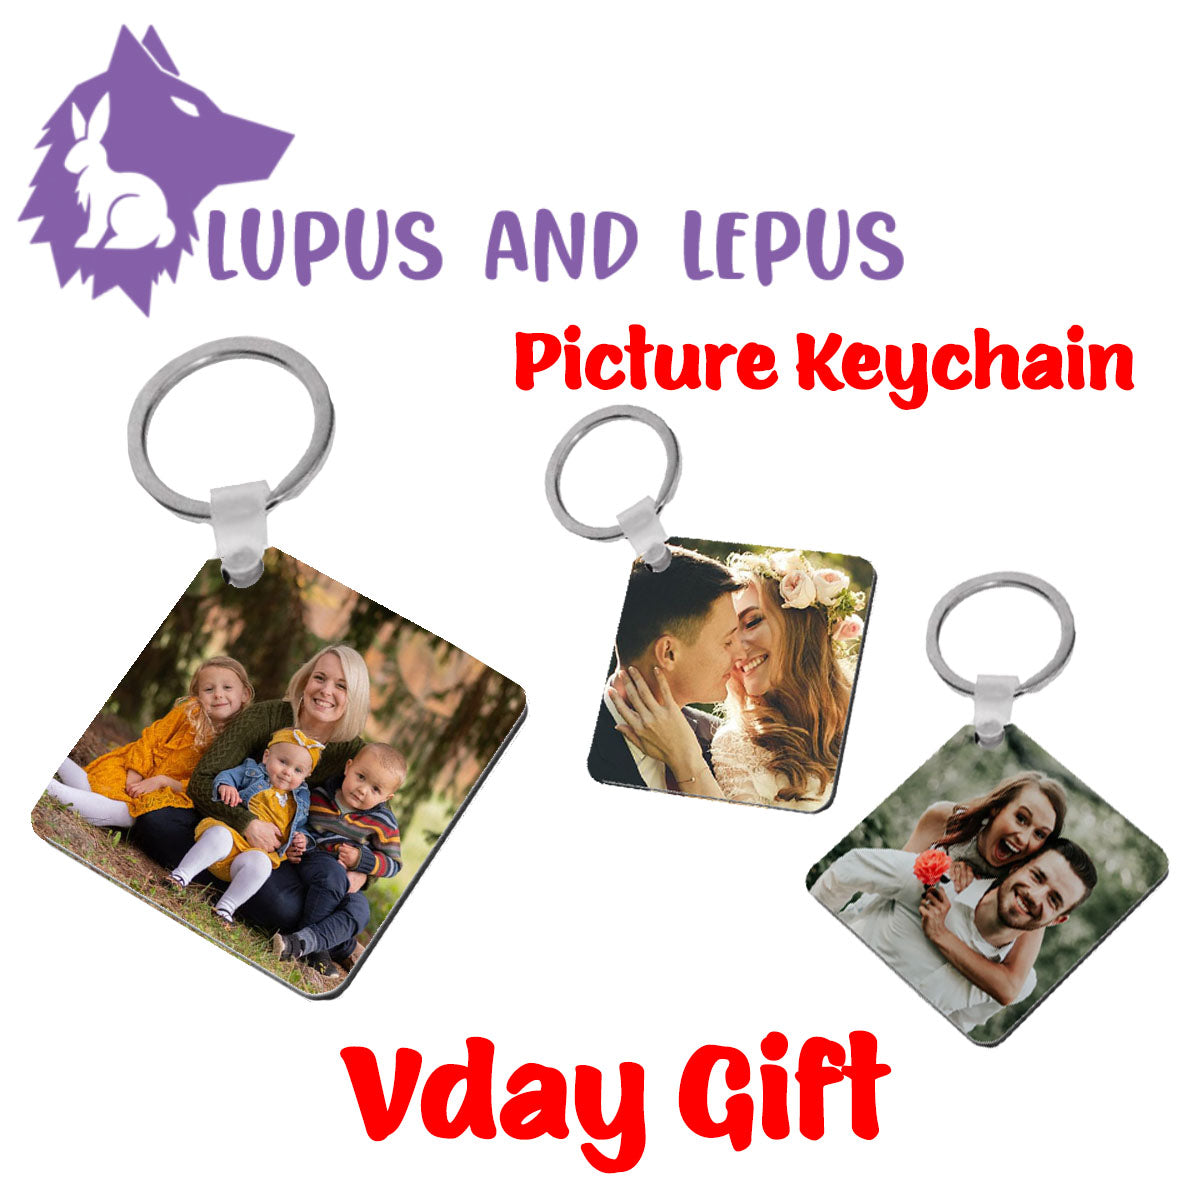 Custom picture Keychain - Your picture sublimated on a keychains, vday, gift, custom, valentines day, gift for wife, gift for gf, love, pet,